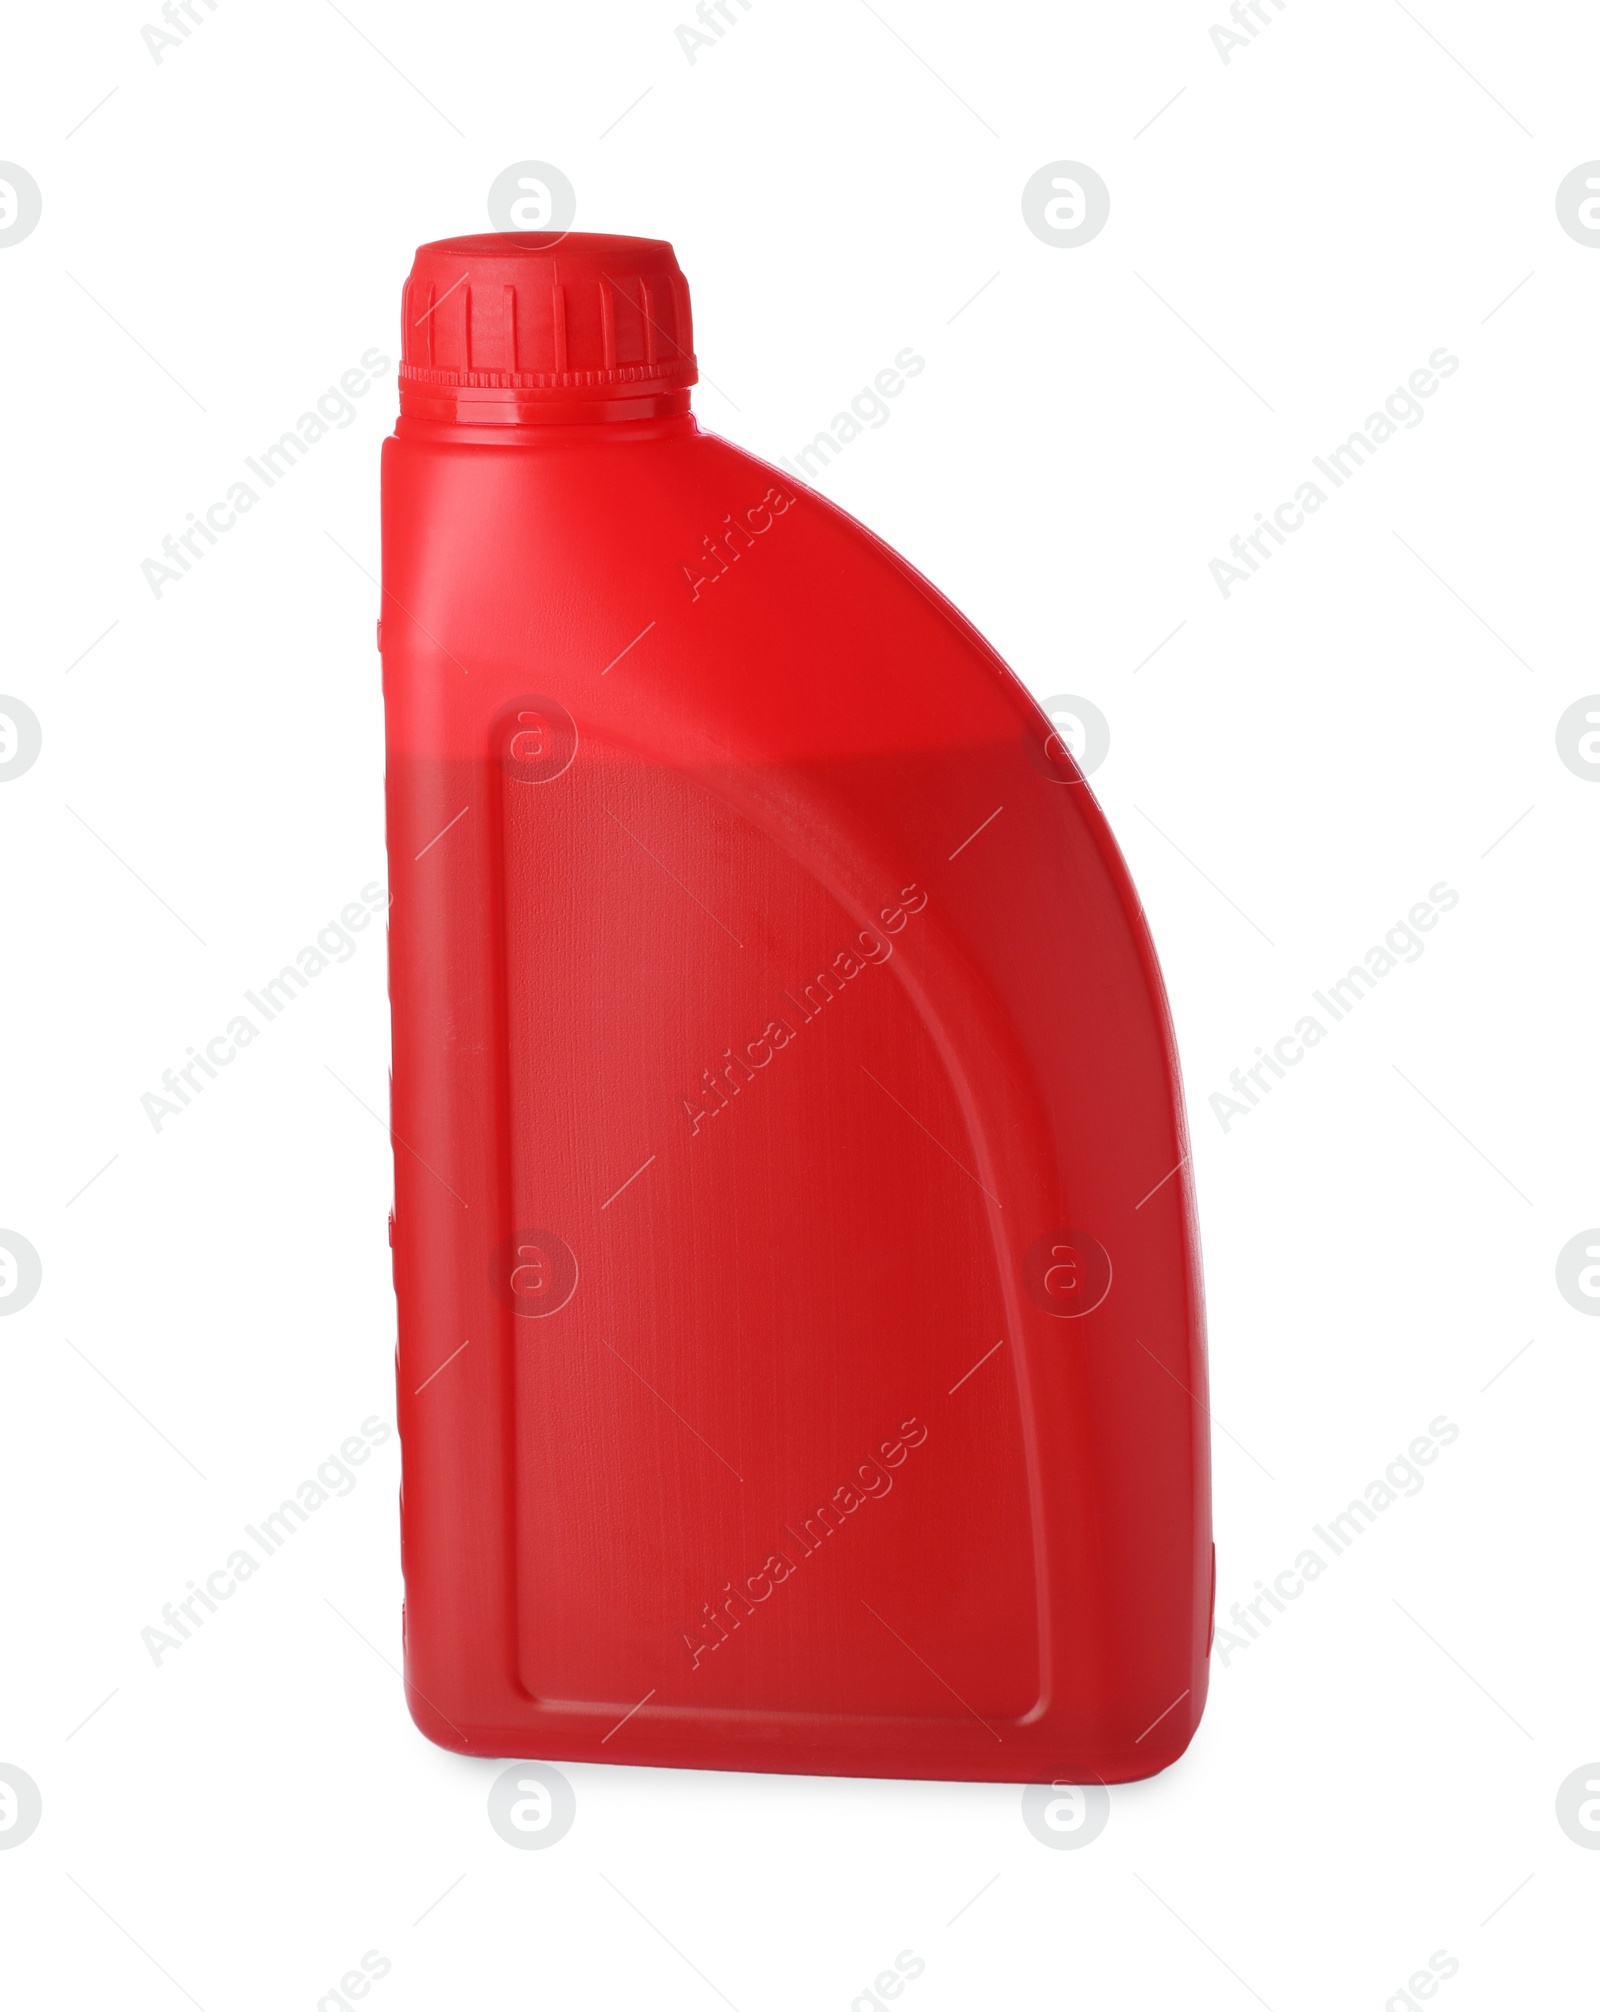 Photo of Blank red container of car product isolated on white